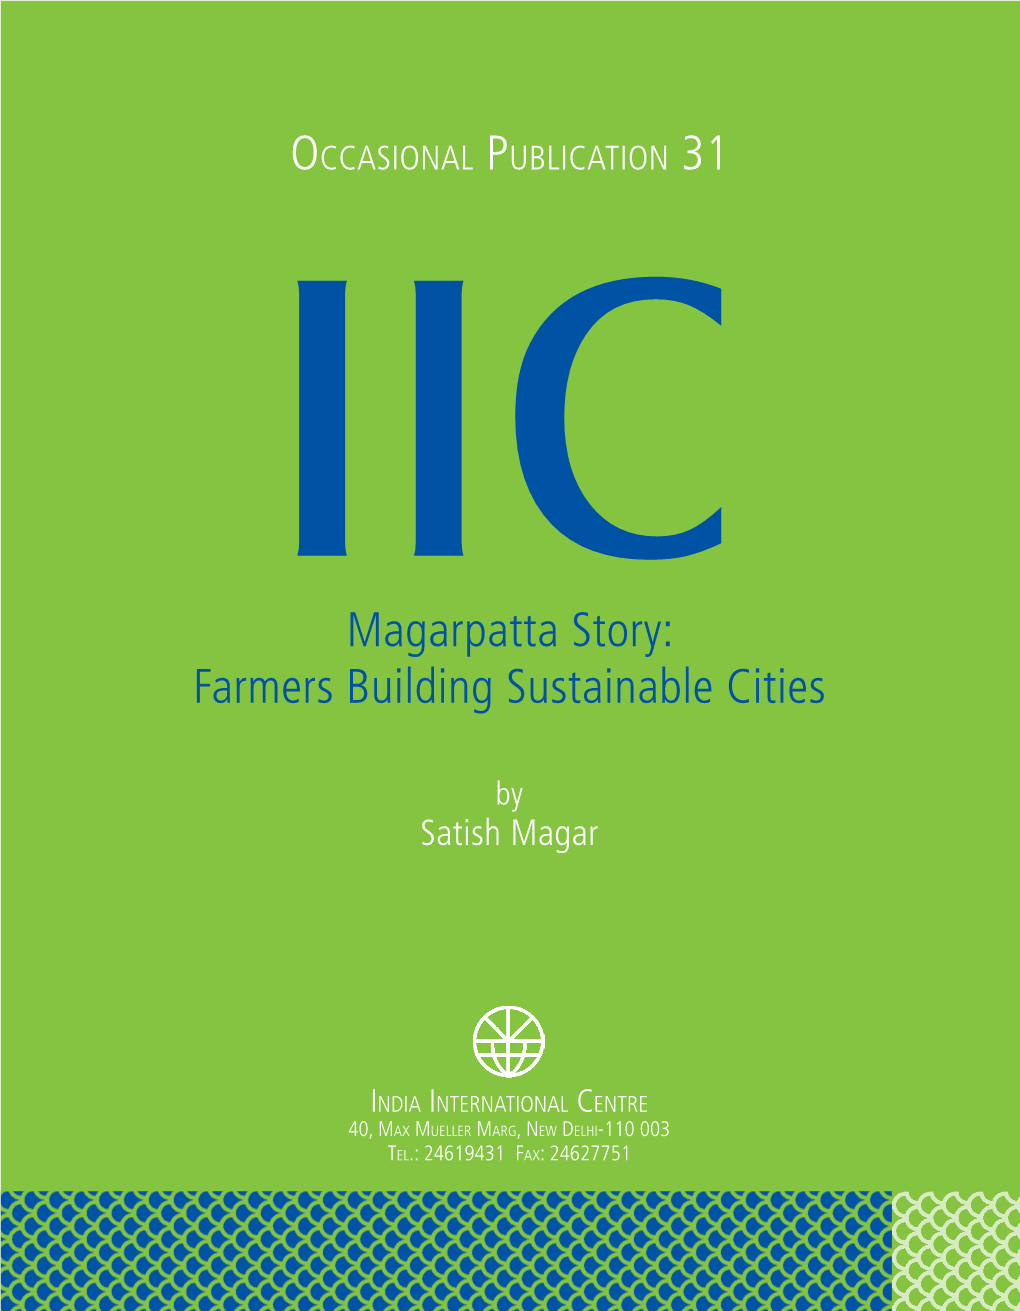 Magarpatta Story: Farmers Building Sustainable Cities